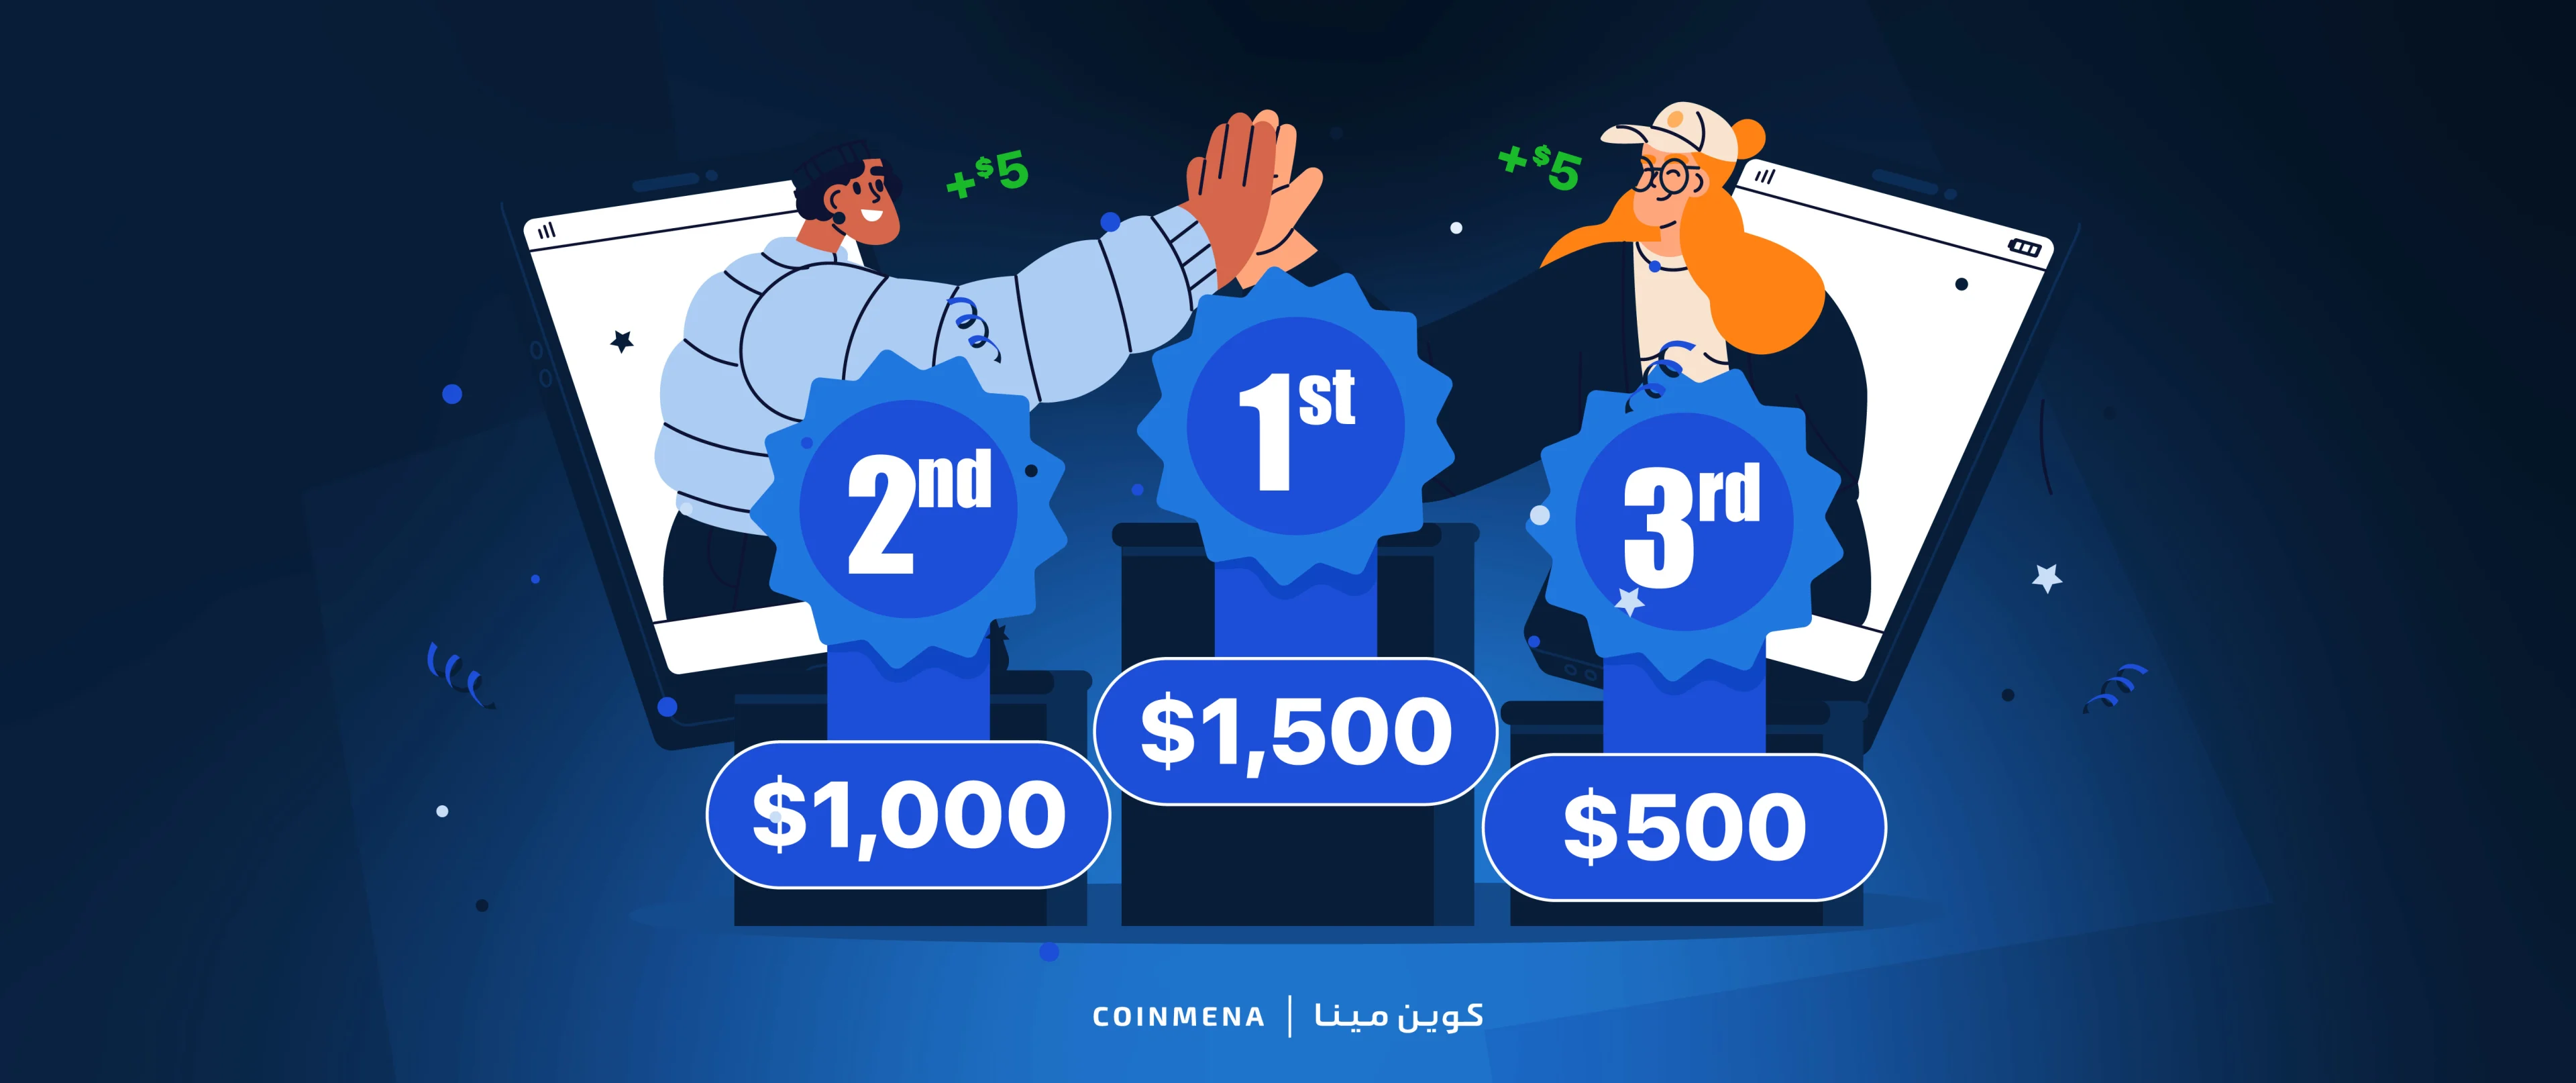 $3,000 Referral Competition 